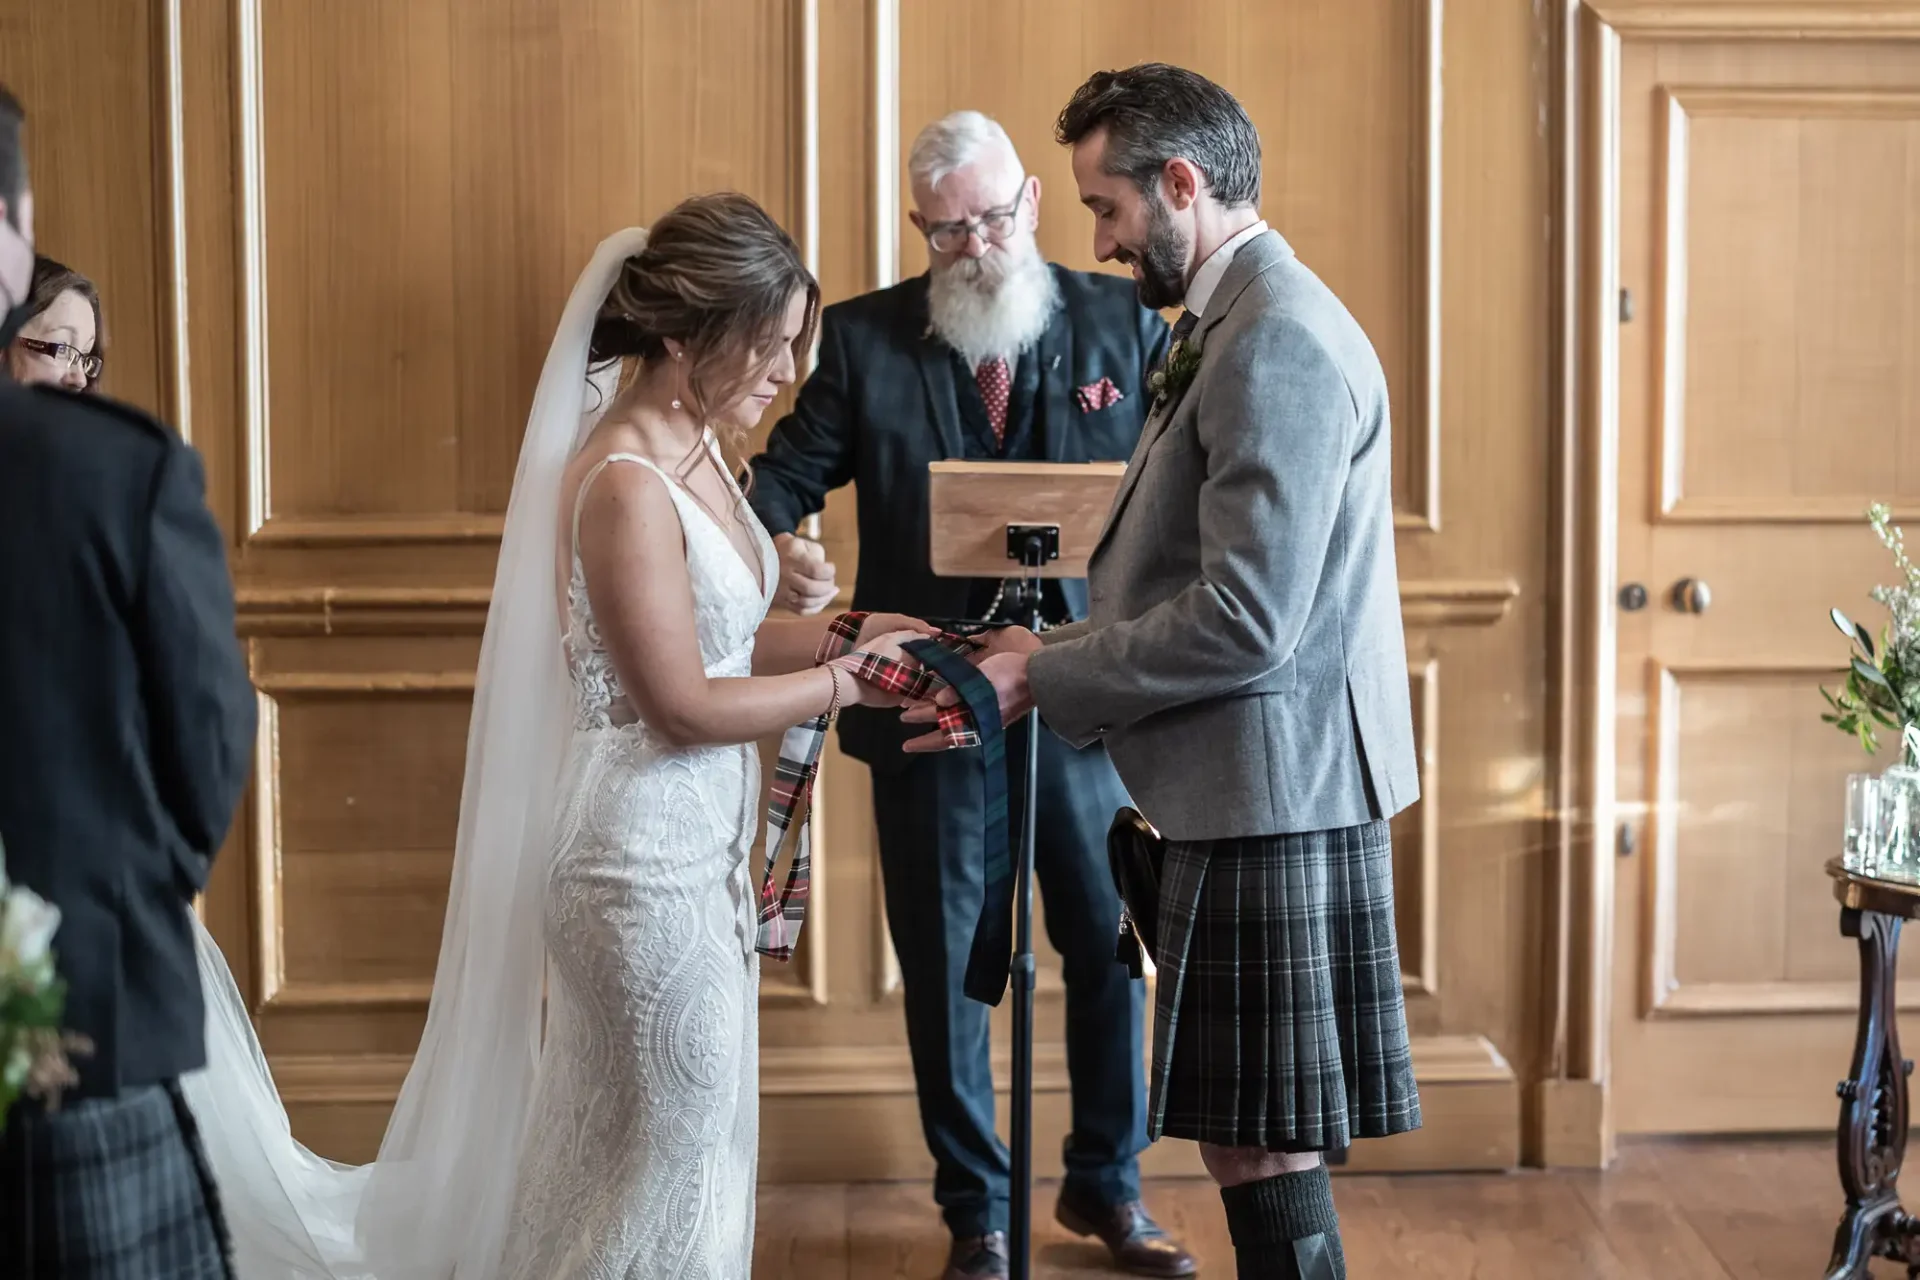 Bride and groom, dressed in a lace wedding gown and kilt, participate in a handfasting ceremony officiated by a bearded man, in a wood-paneled room.